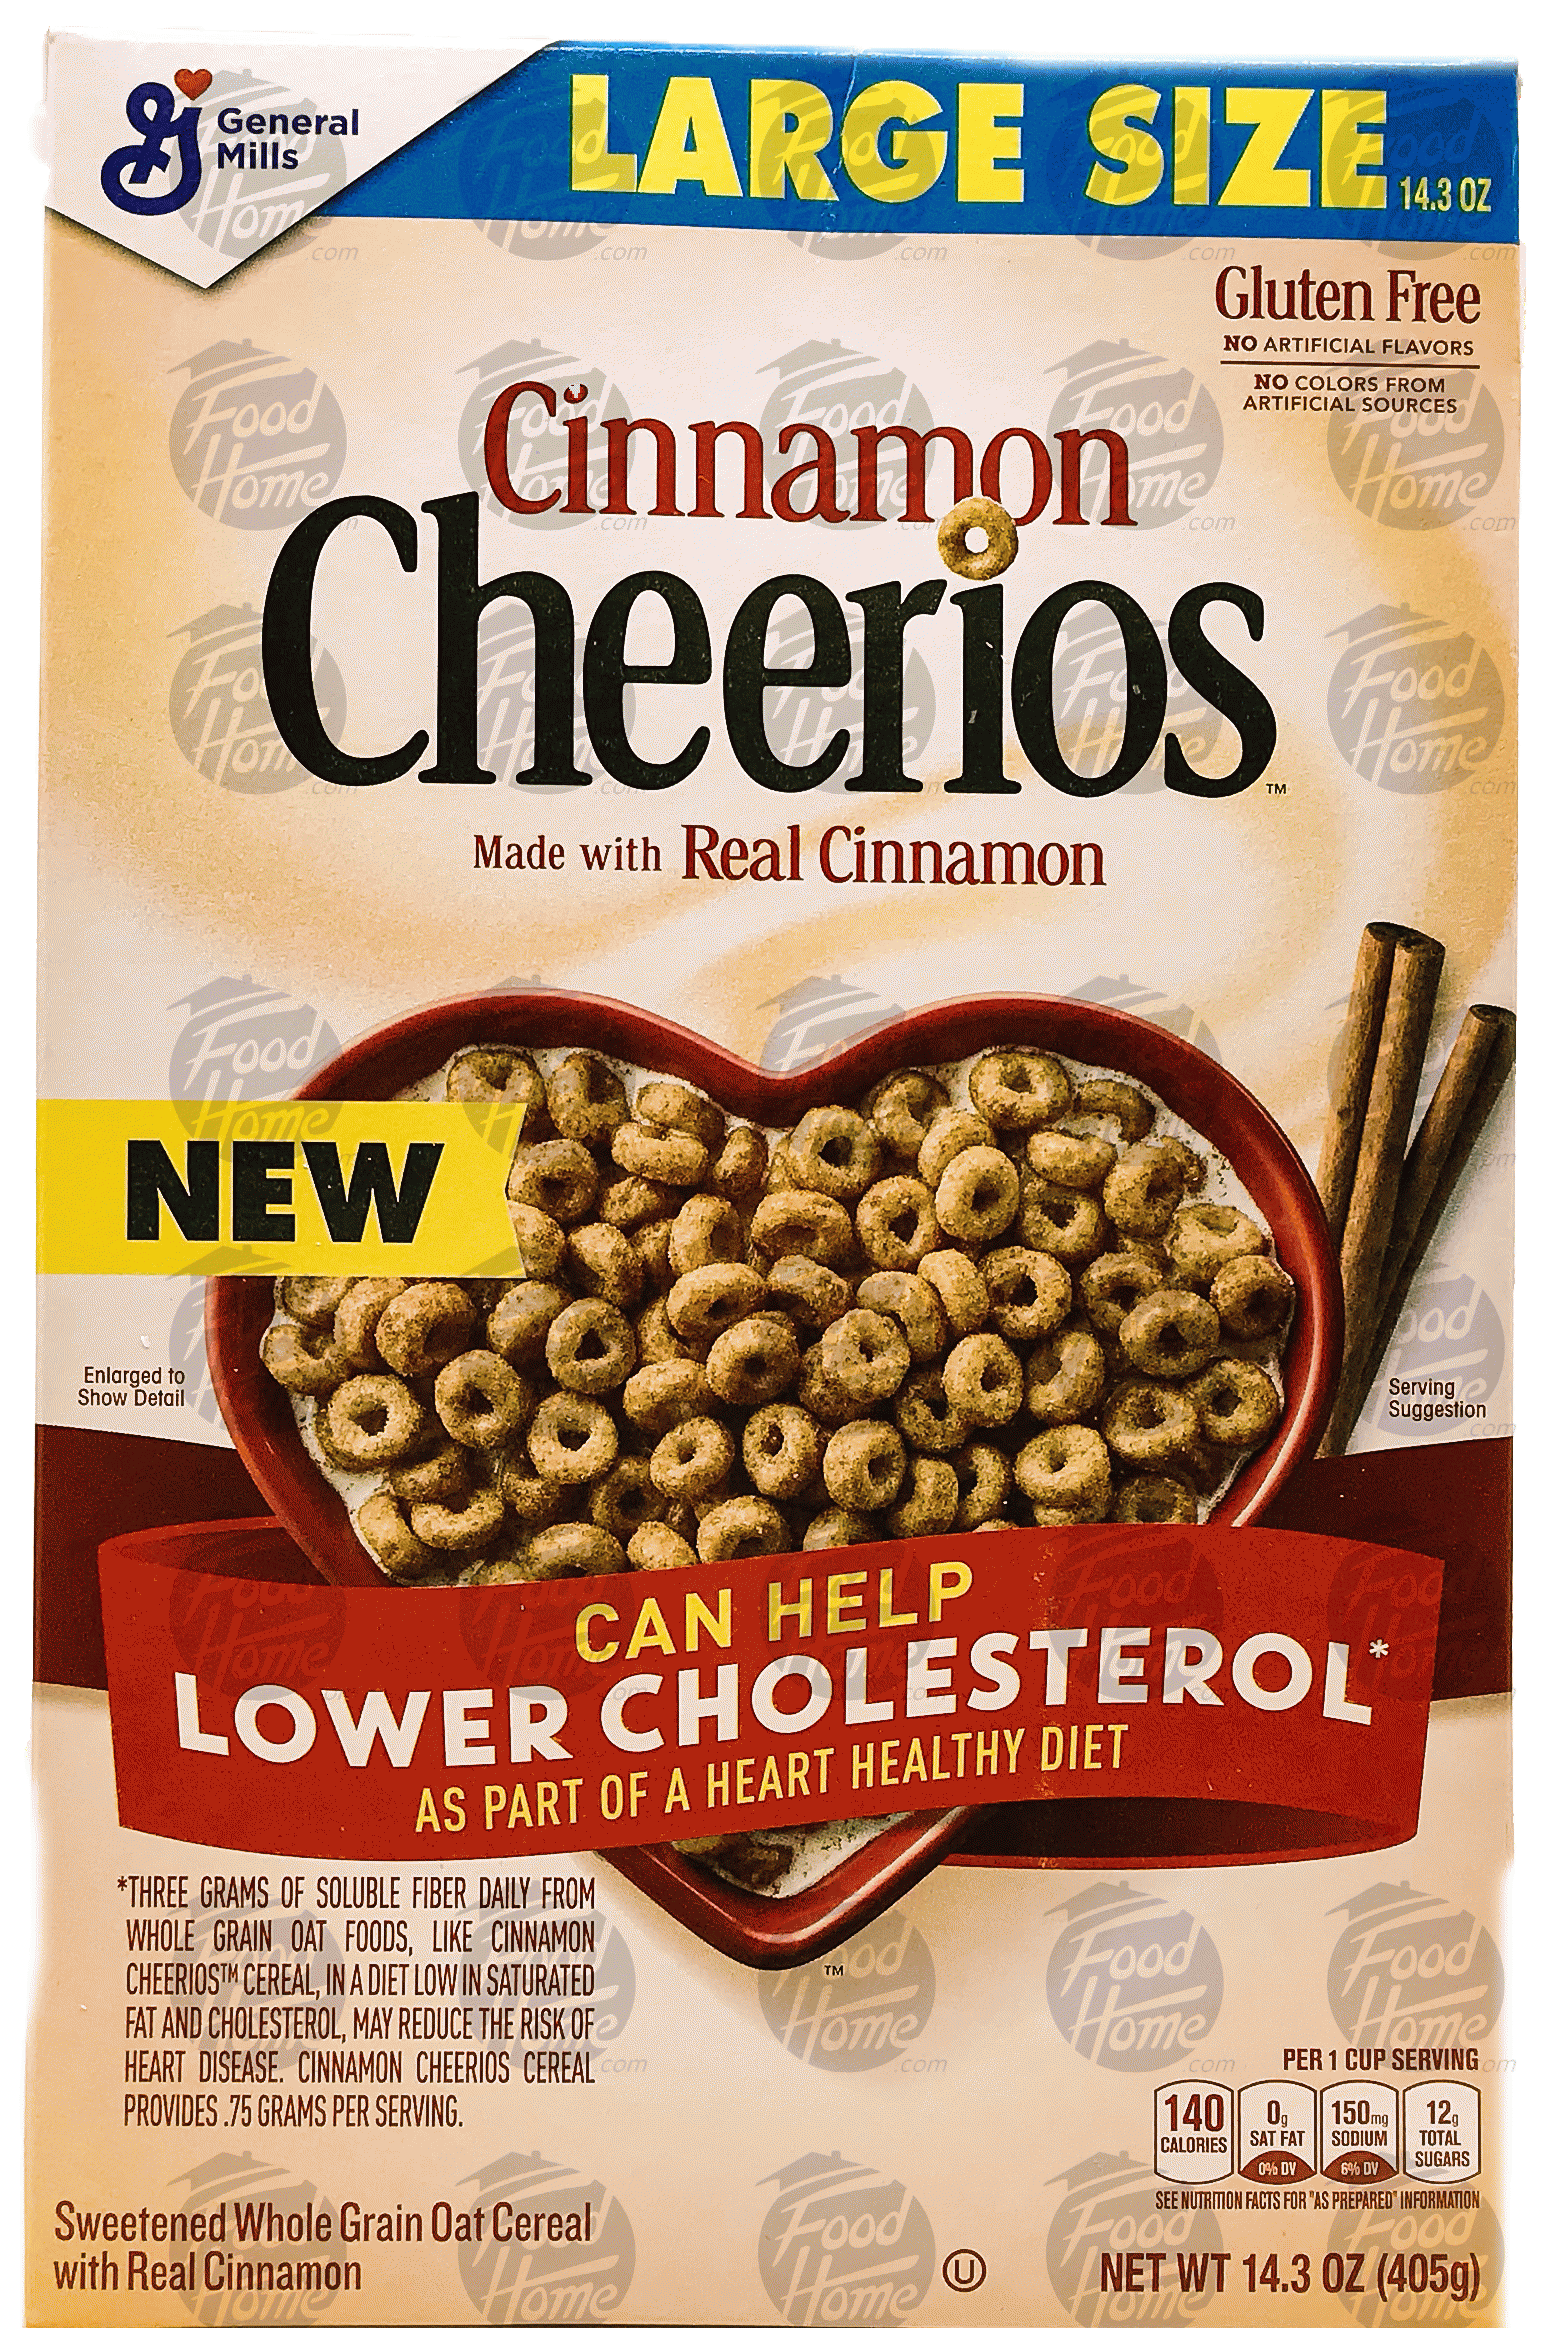 Cheerios Large Size sweetened whole grain oat ceral with real cinnamon, box Full-Size Picture